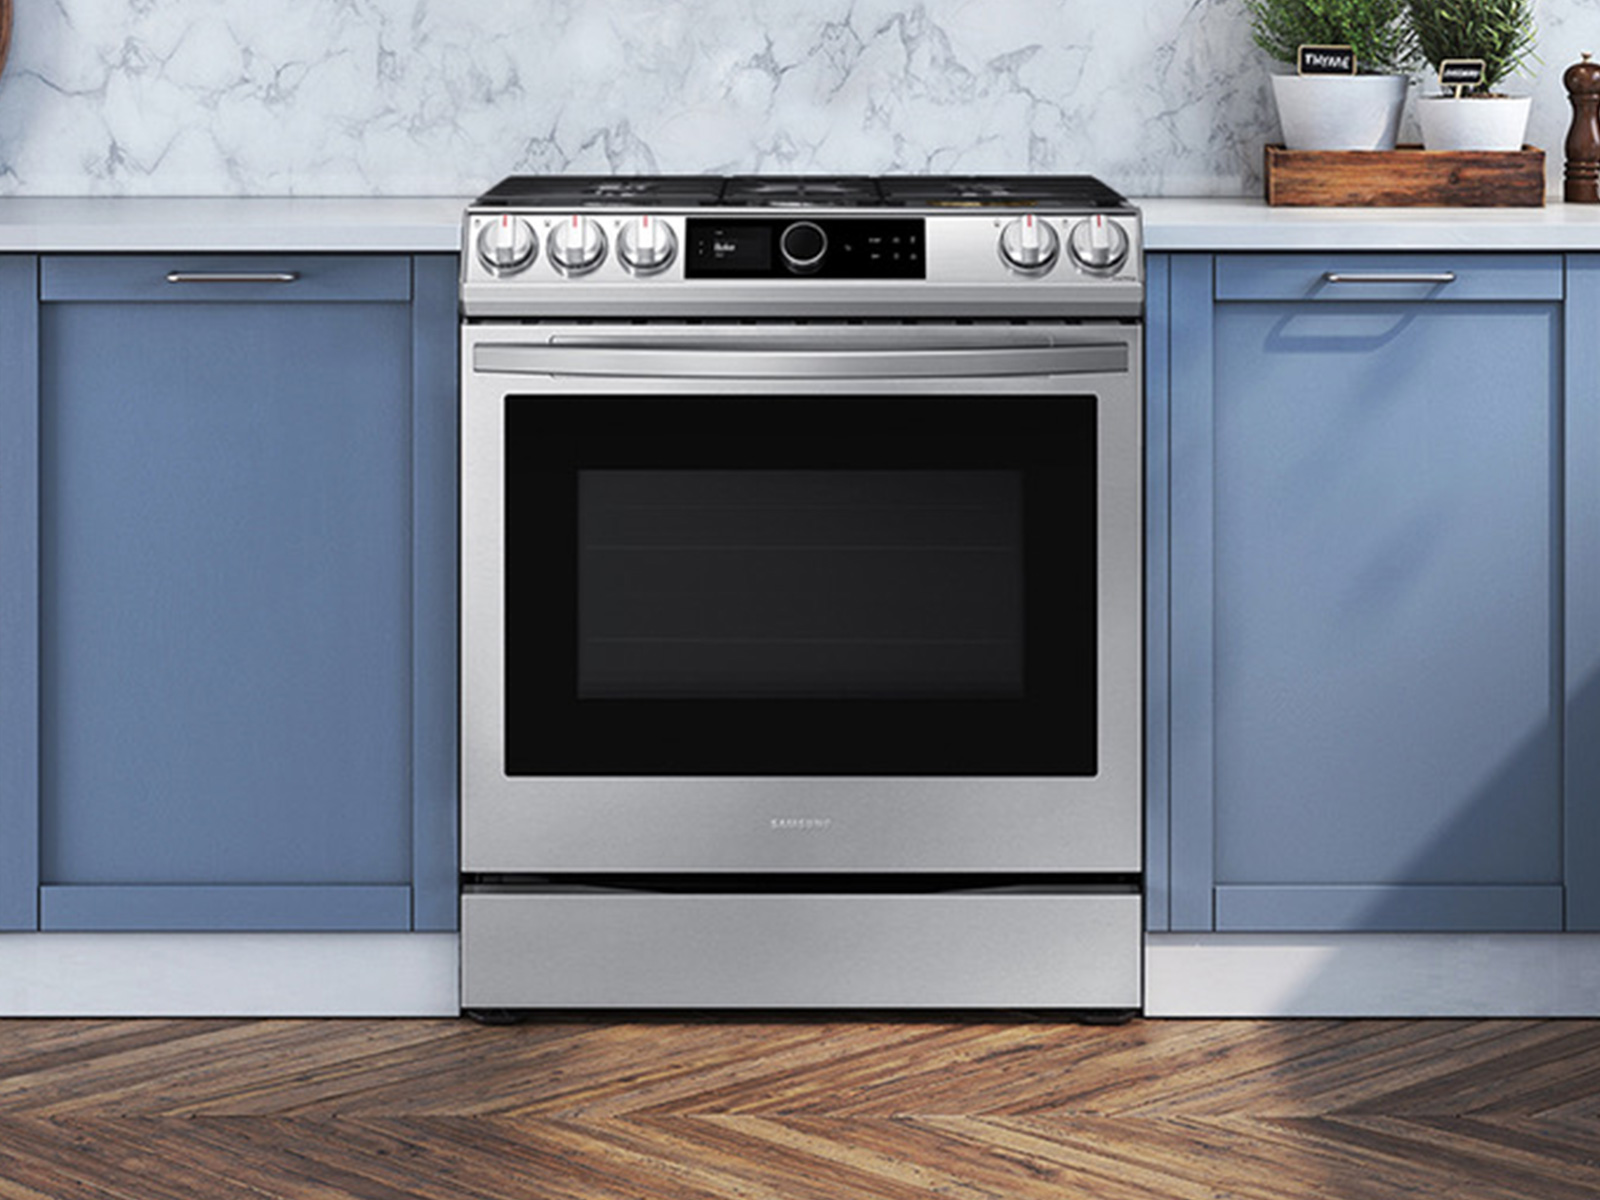 Samsung 6.0 Cu. ft. Slide-in GAS Range with Smart Dial & Air Fry, Stainless Steel - NX60T8711SS